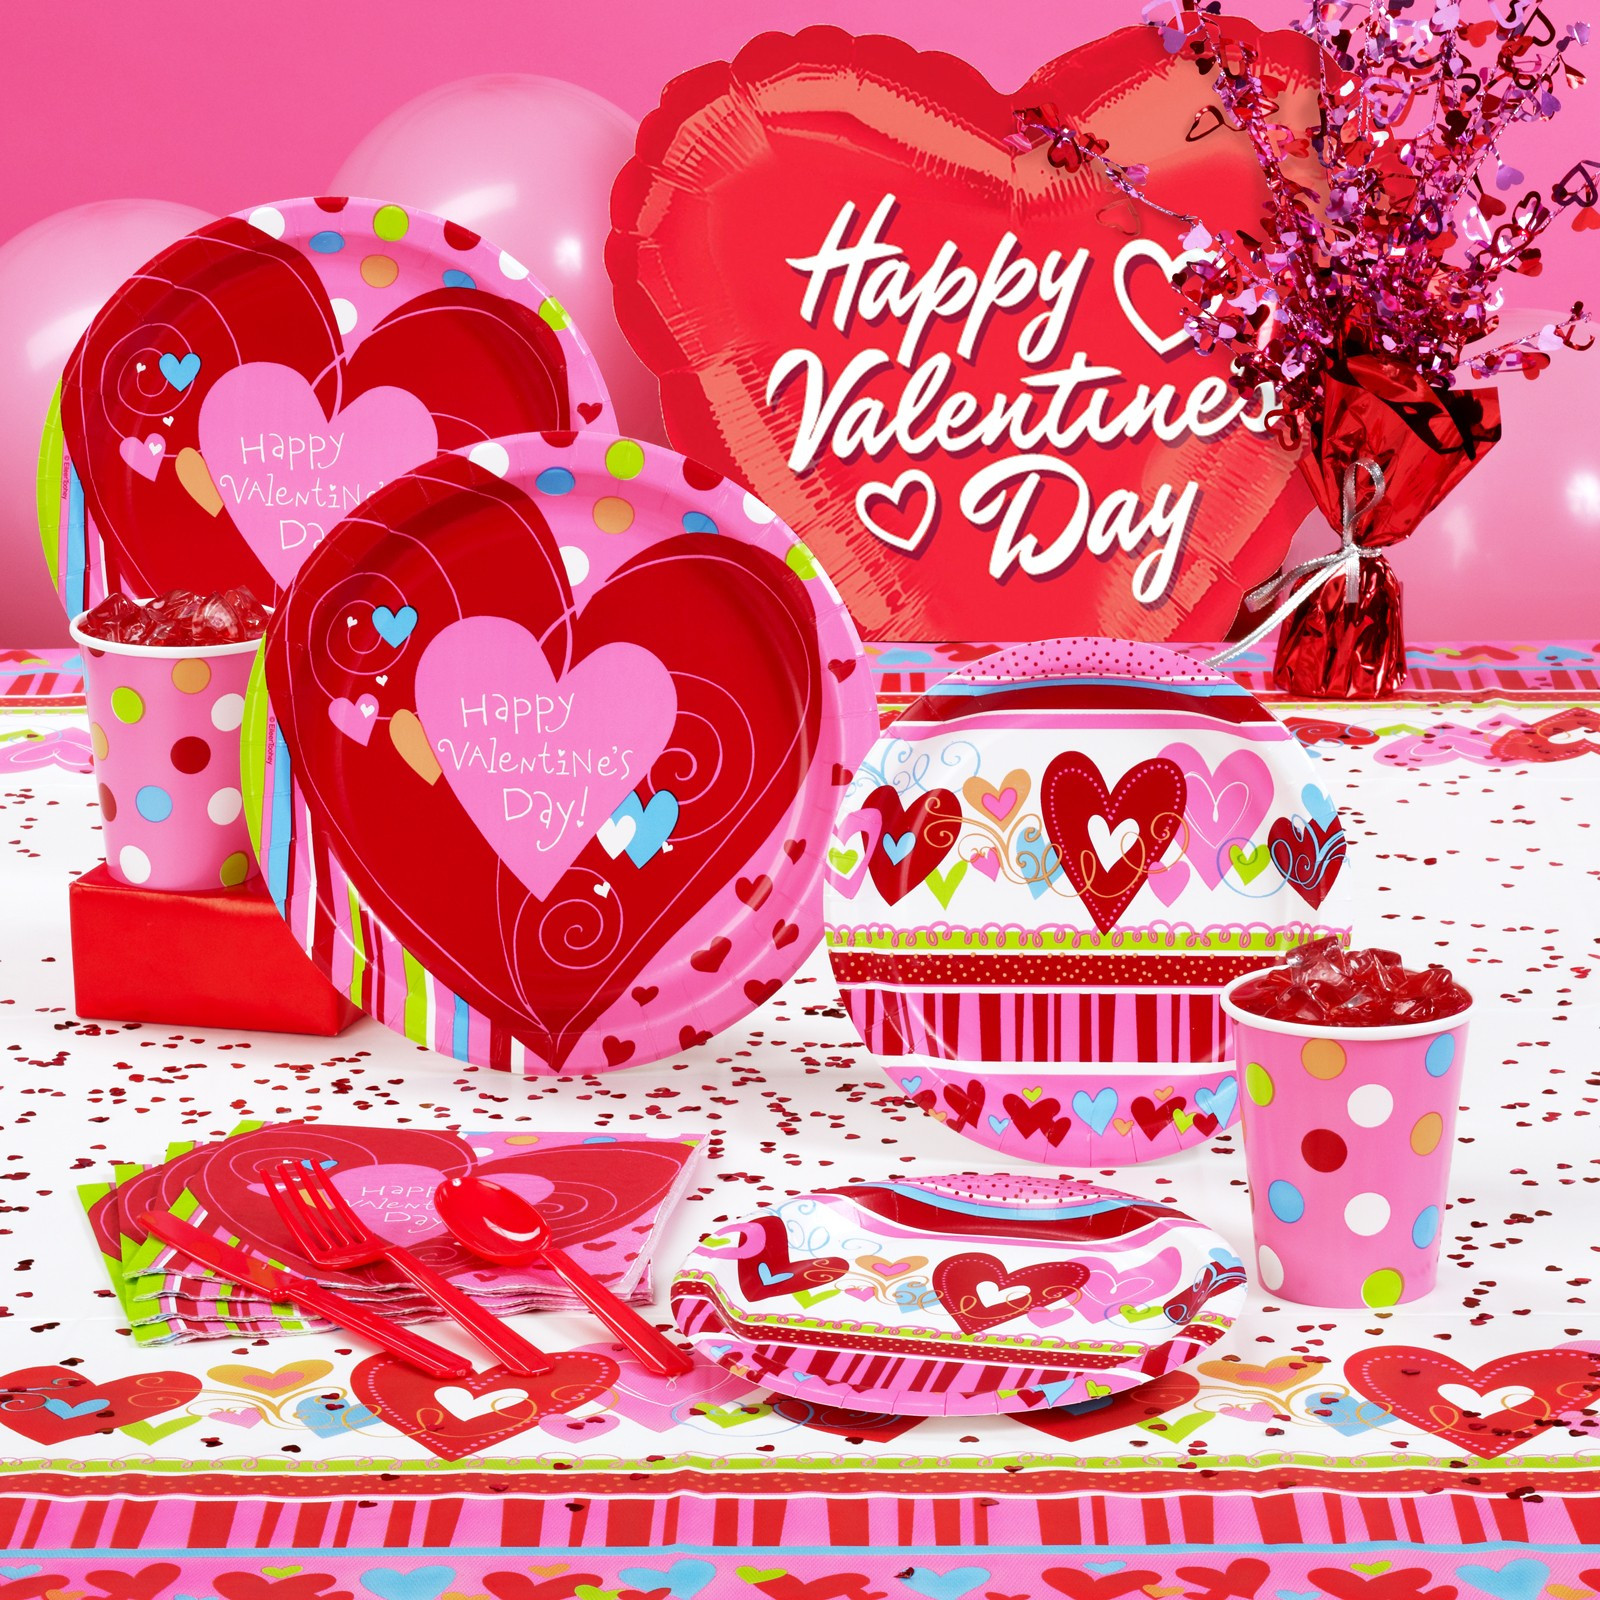 Valentines Day Party Supplies
 Best Valentines Day Party Ideas 2015